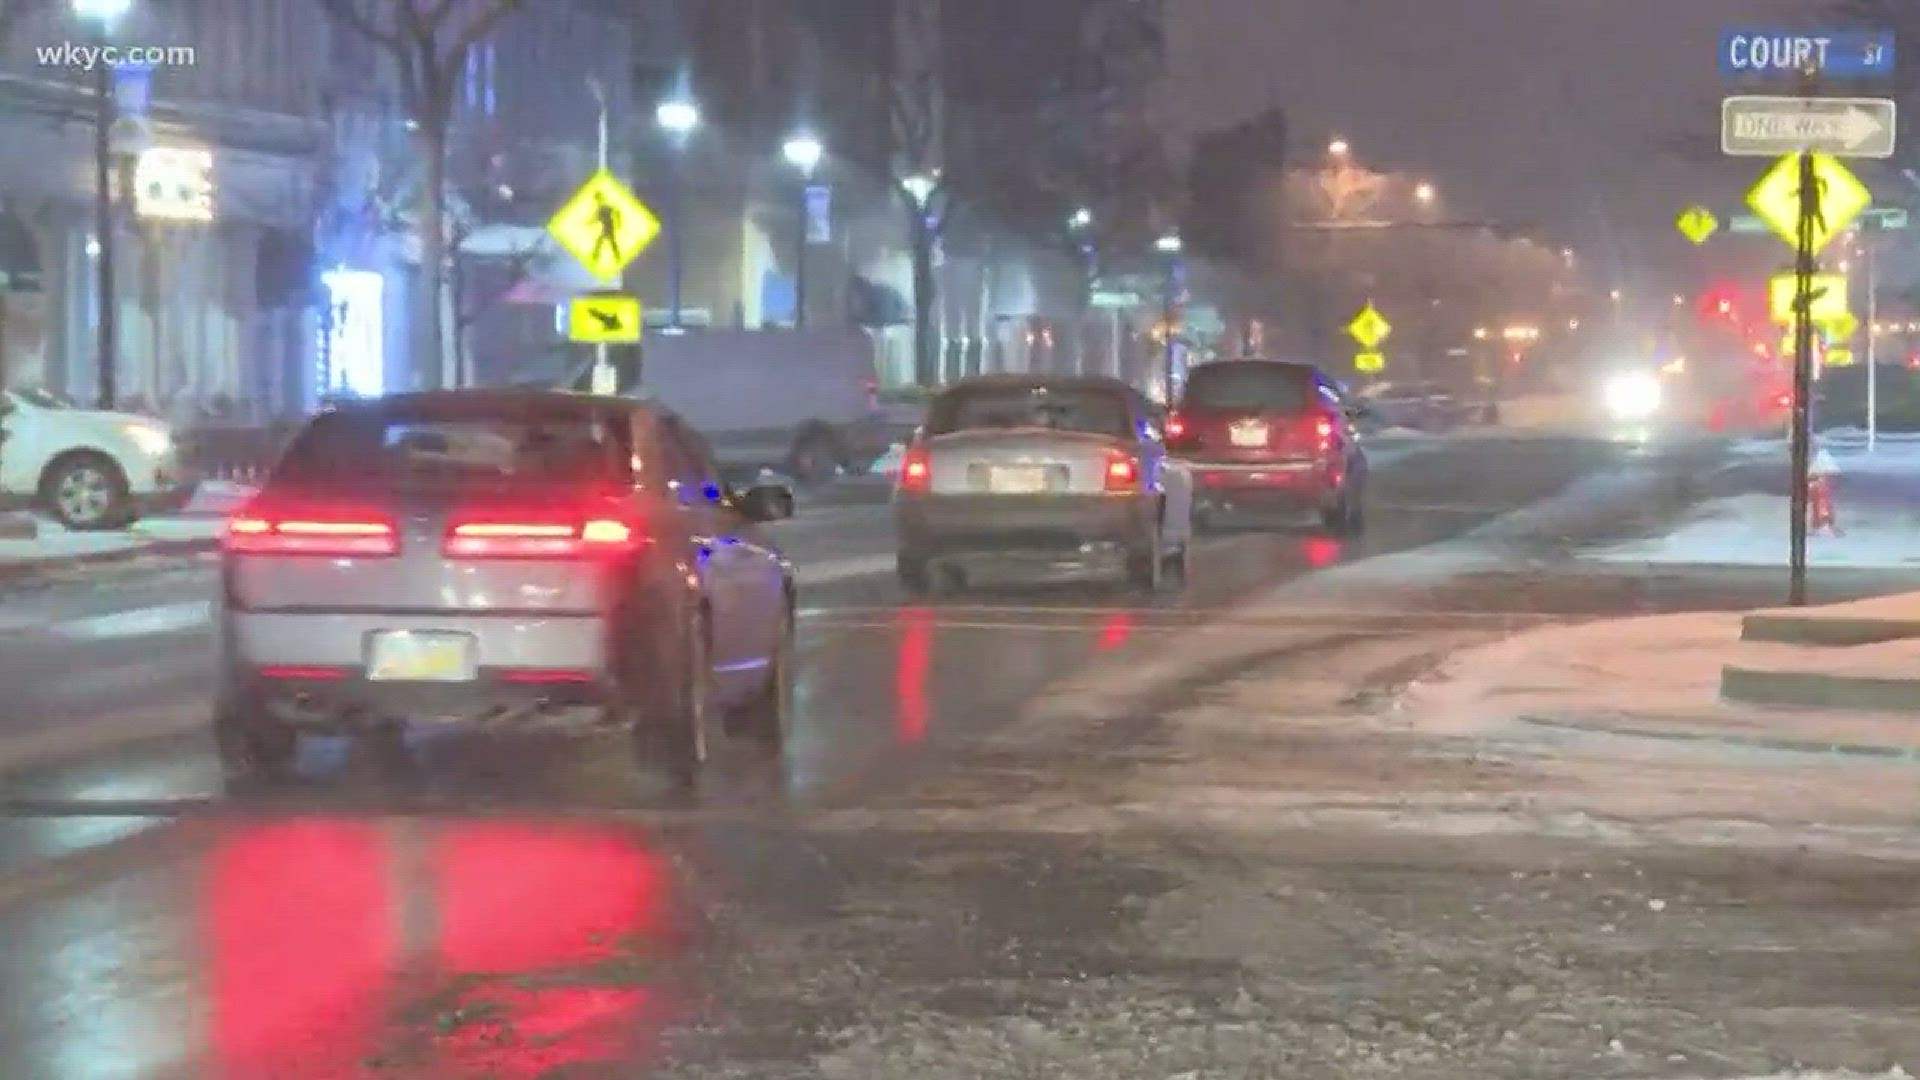 Although snowflakes were flying early this morning, the main roadways in Elyria were clear. WKYC's Tiffany Tarpley shows us the traffic conditions.